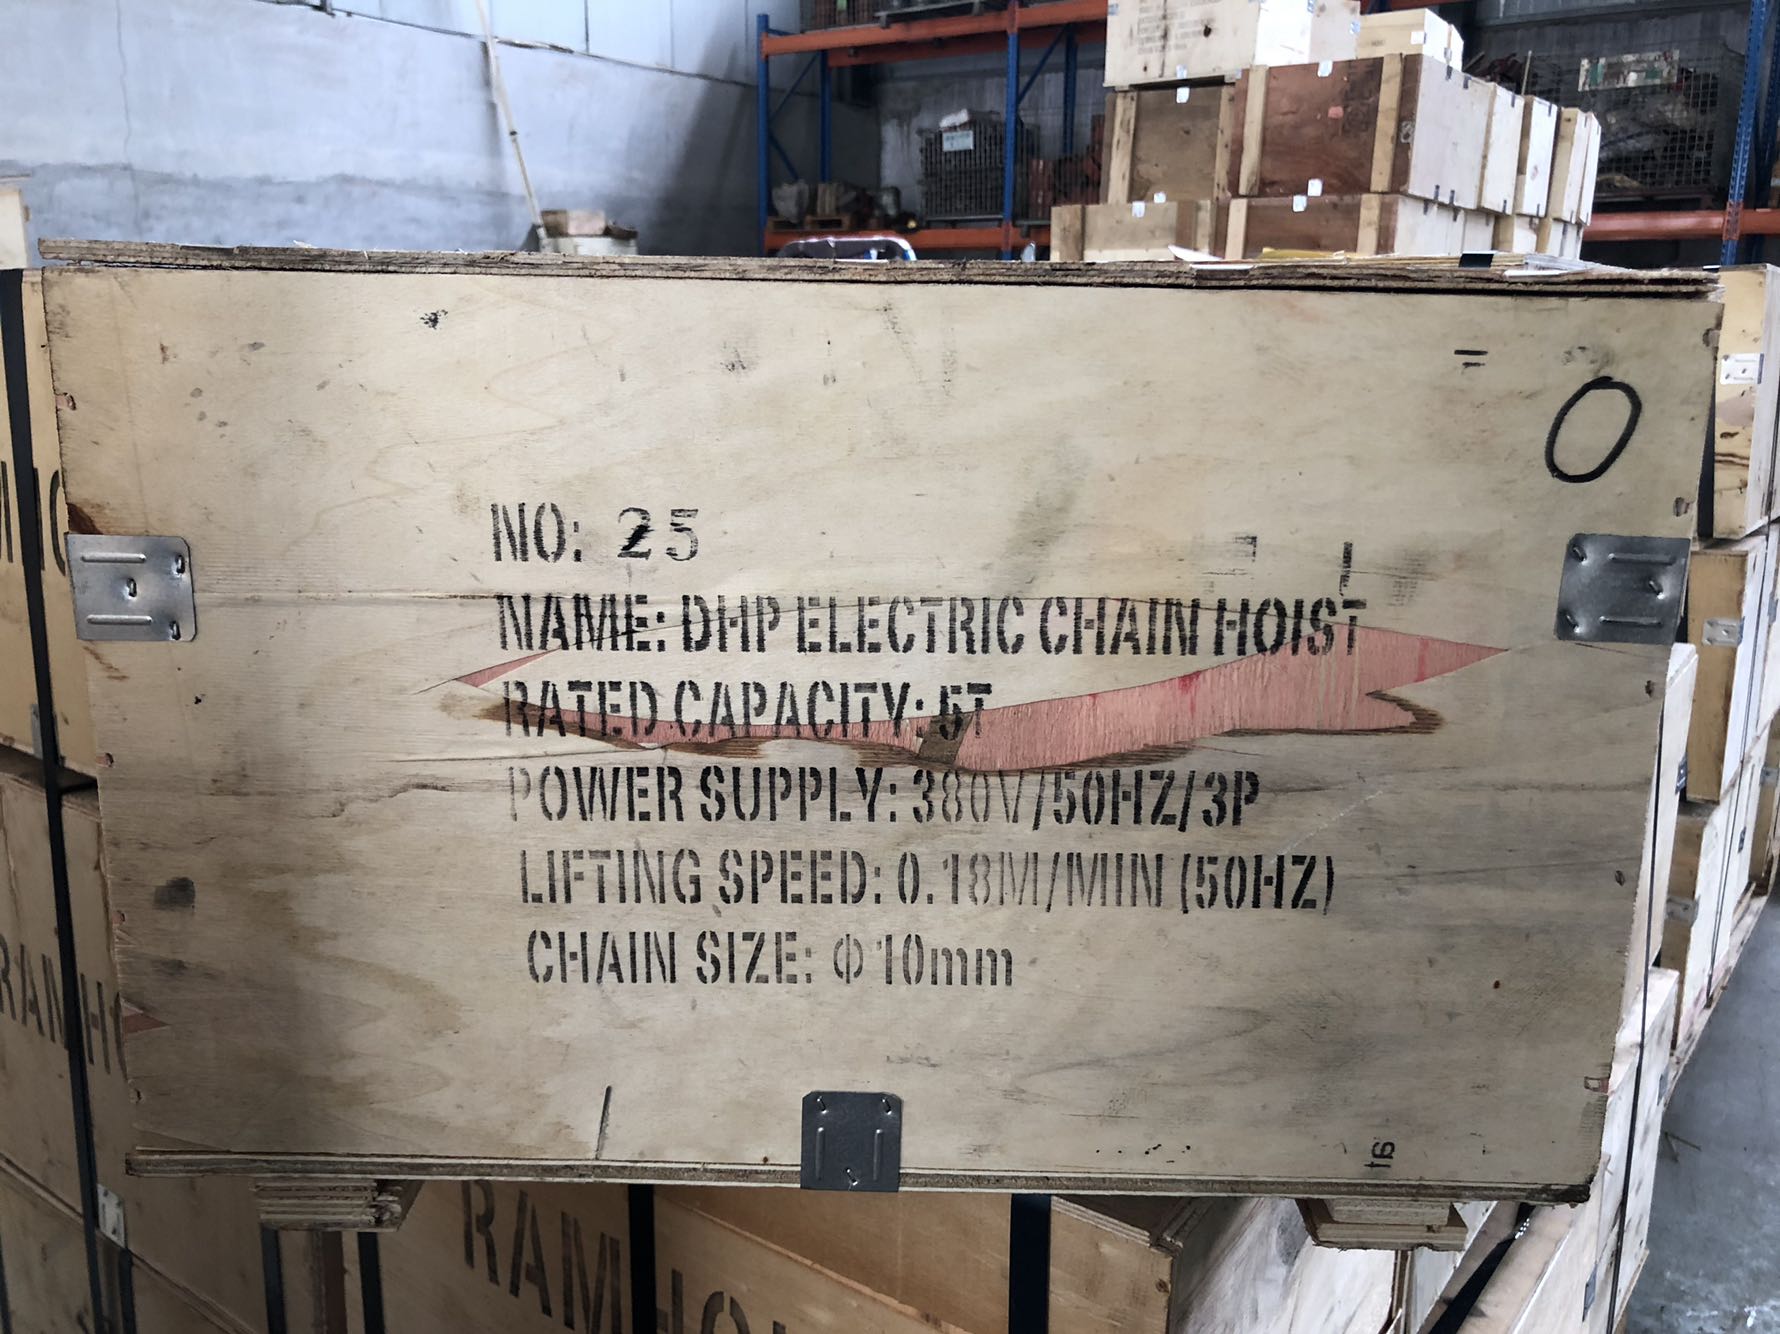 Spare parts are in the NO 25 box of 5T DHP electric chain hoist (marked in black circle)2.jpg